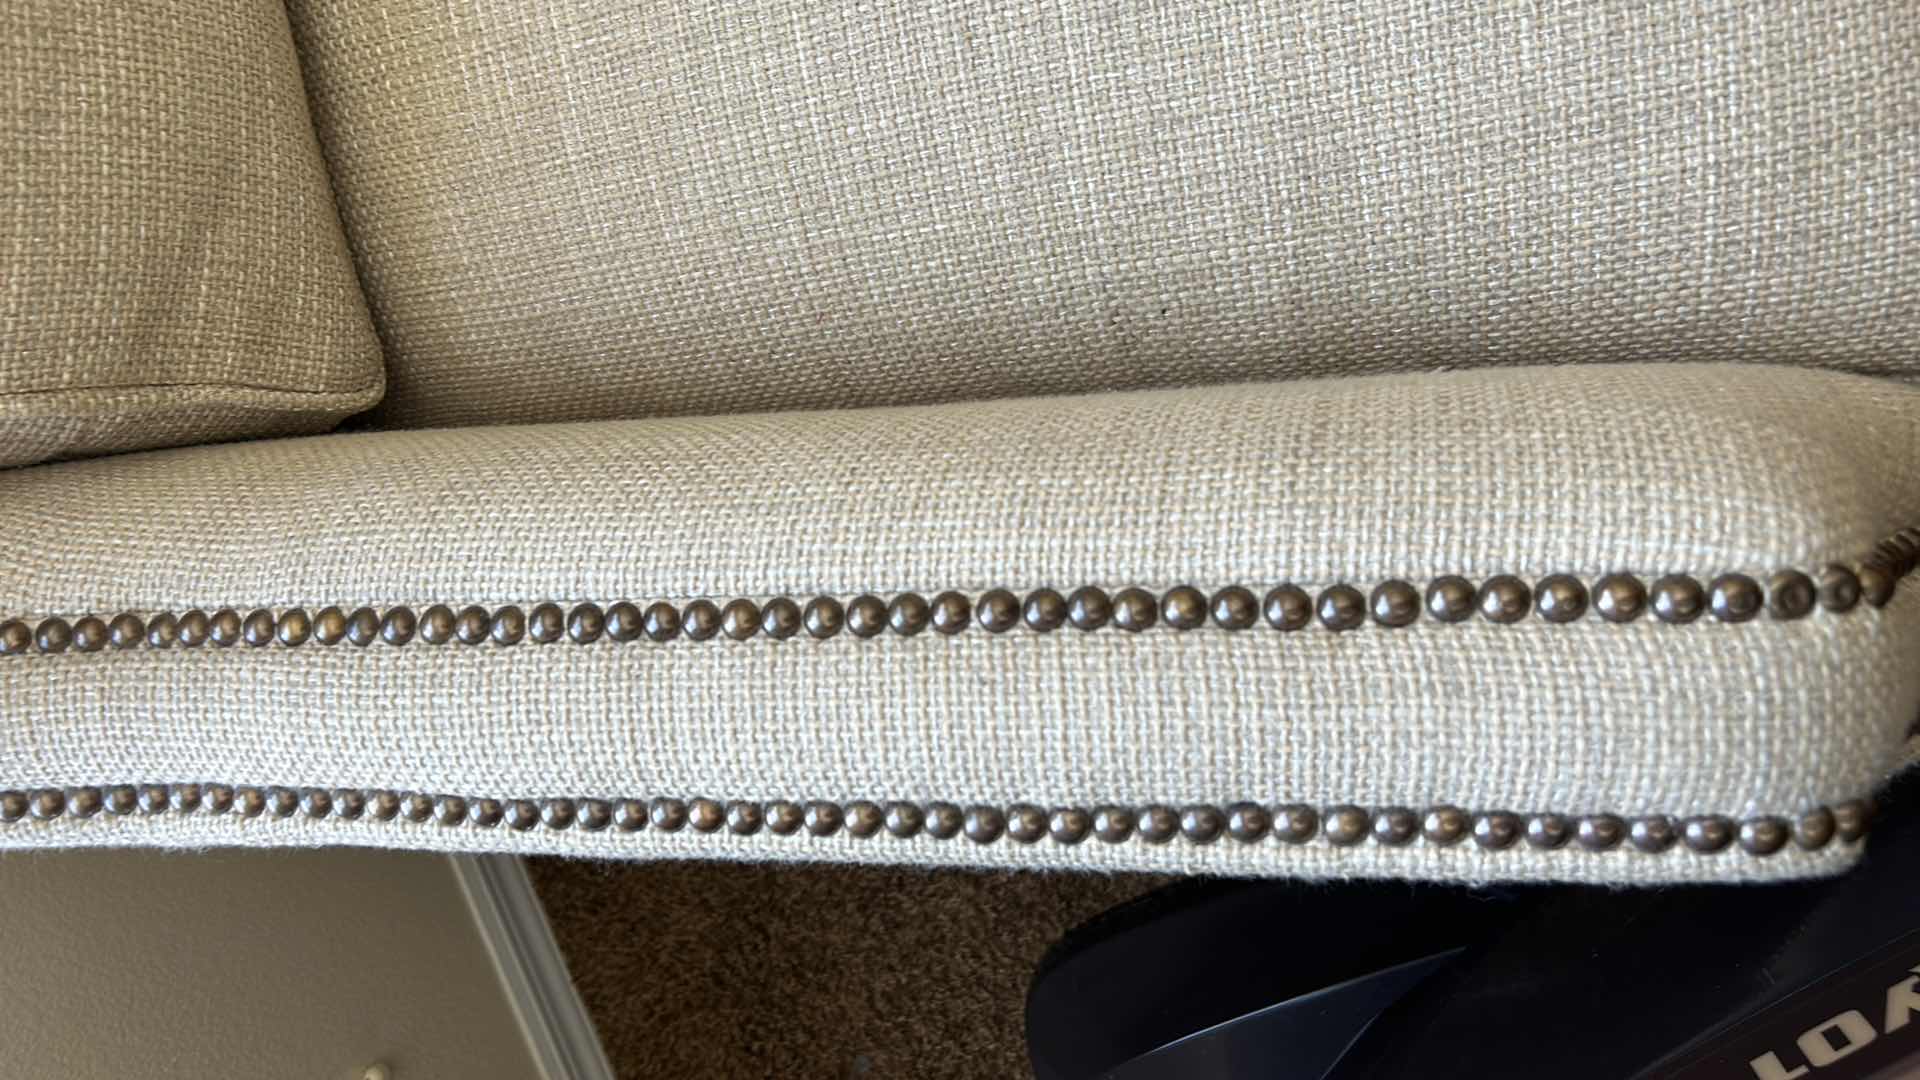 Photo 4 of 7' SOFA-  LEXINGTON UPHOLSTERY MADE IN USA OFF WHITE TEXTURED LINEN WITH NAIL HEAD FINISH